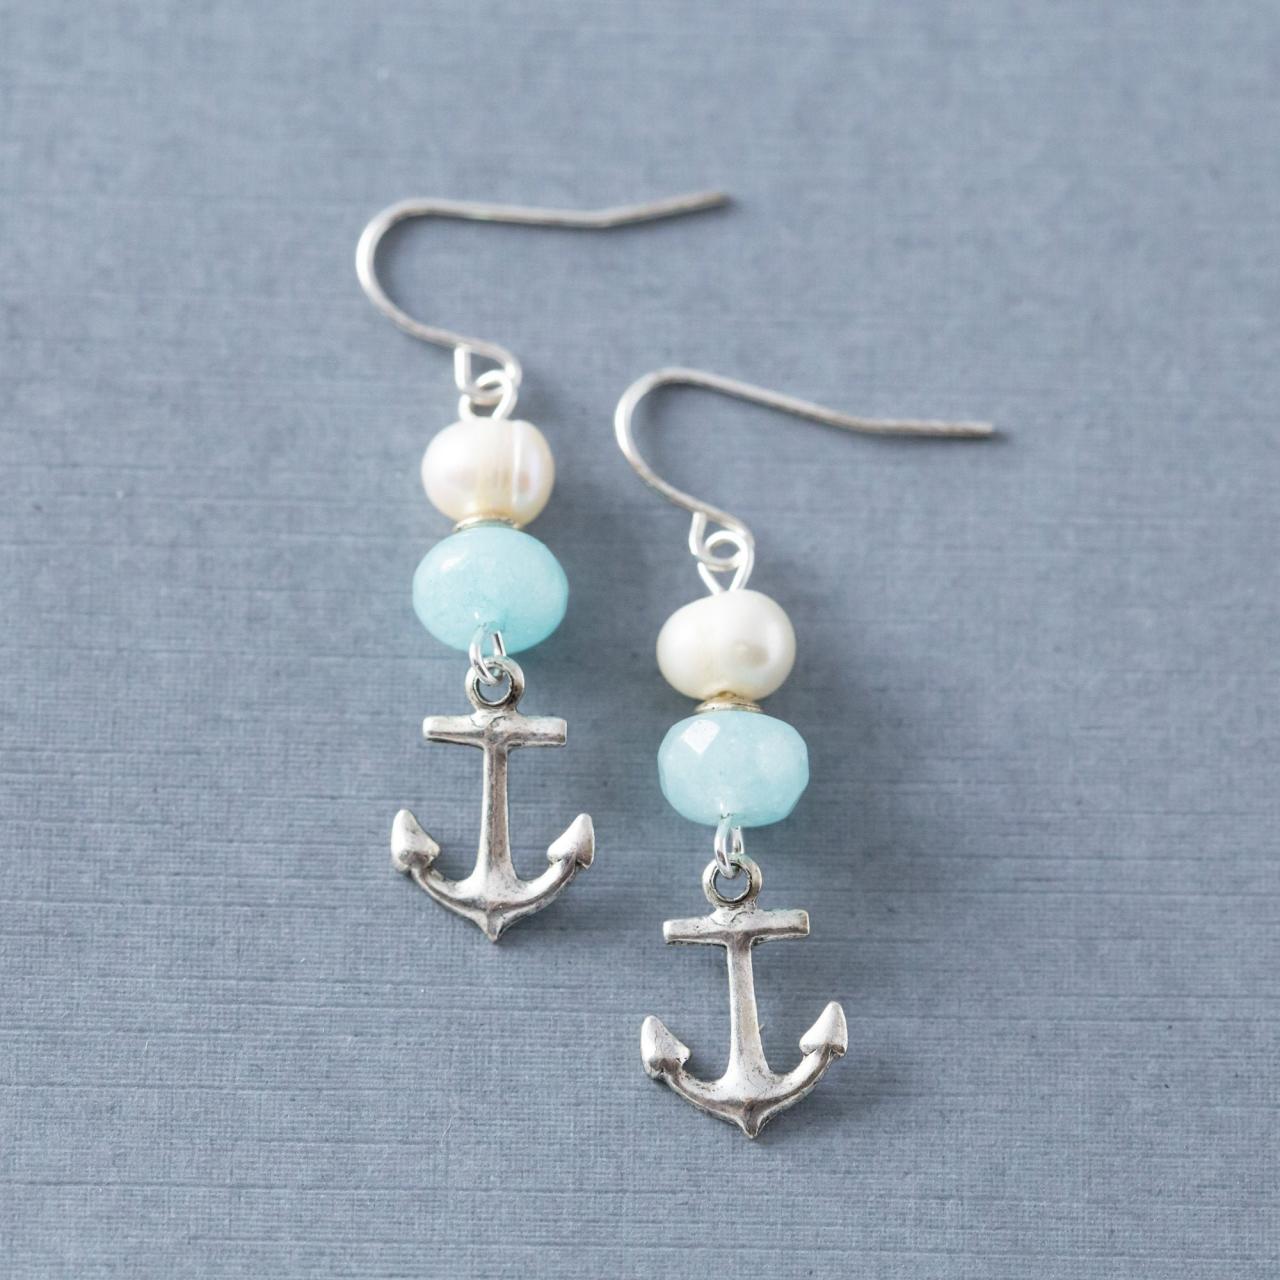 Silver Anchor Nautical Beach Earrings With Freshwater Pearls And Blue Amazonite Beads, Nautical Jewelry